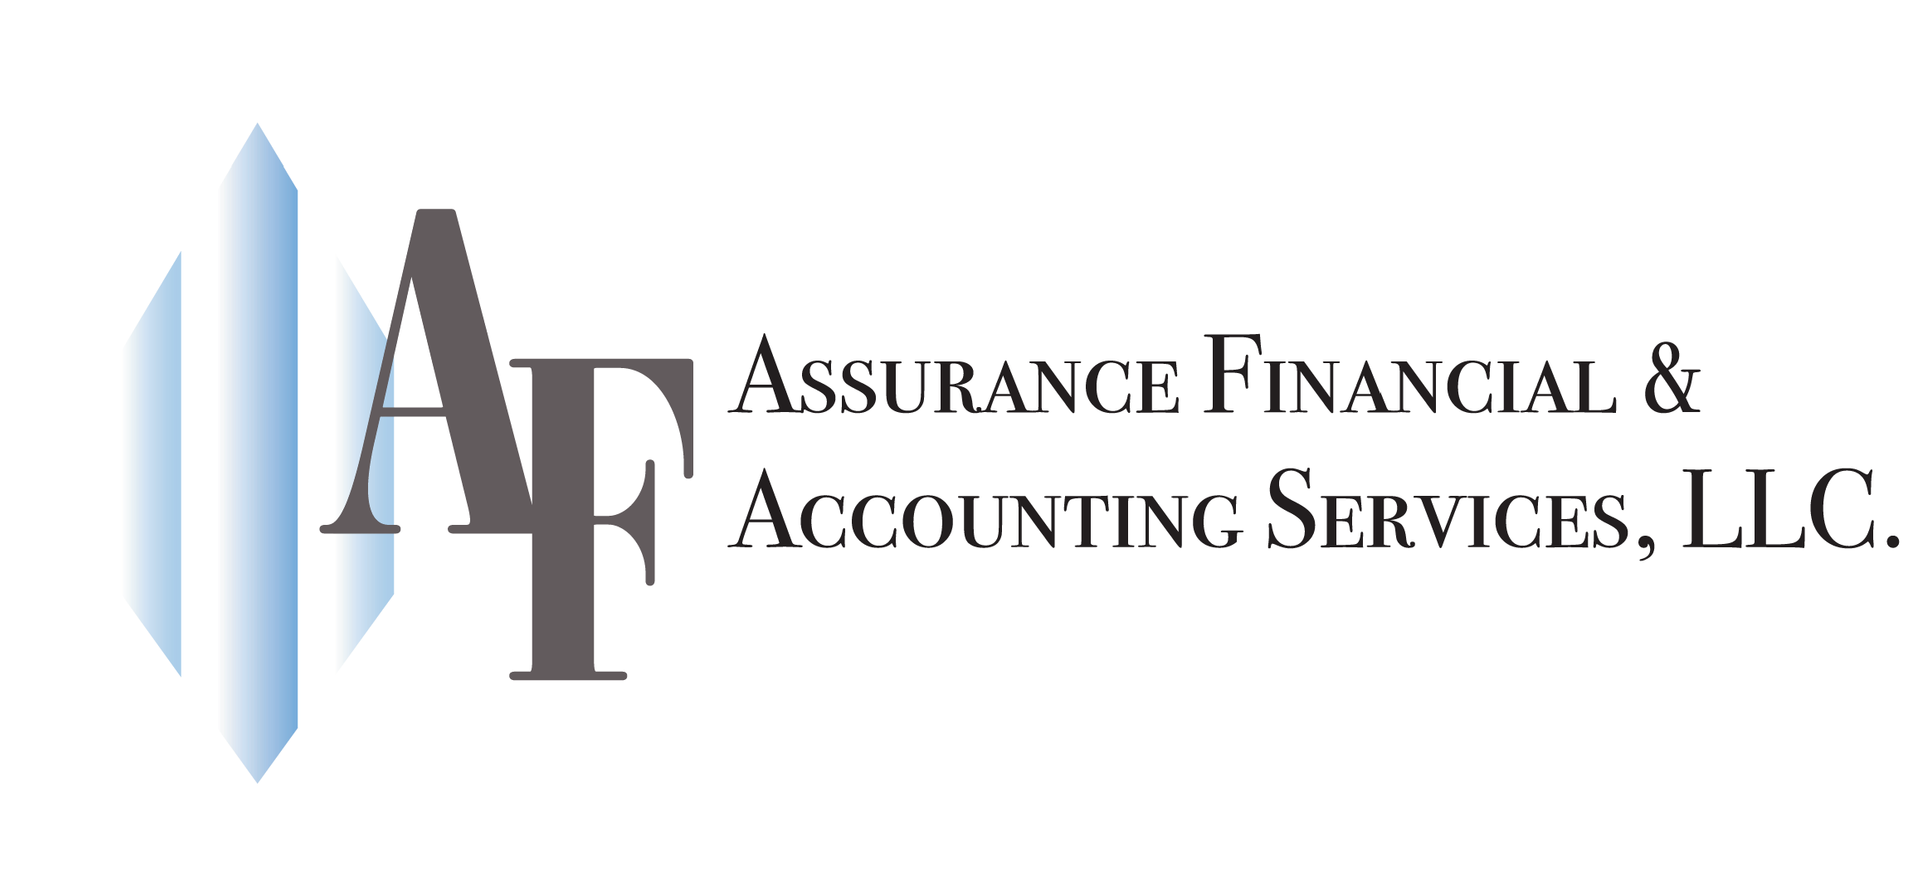 Assurance Financial & Accounting Services, LLC